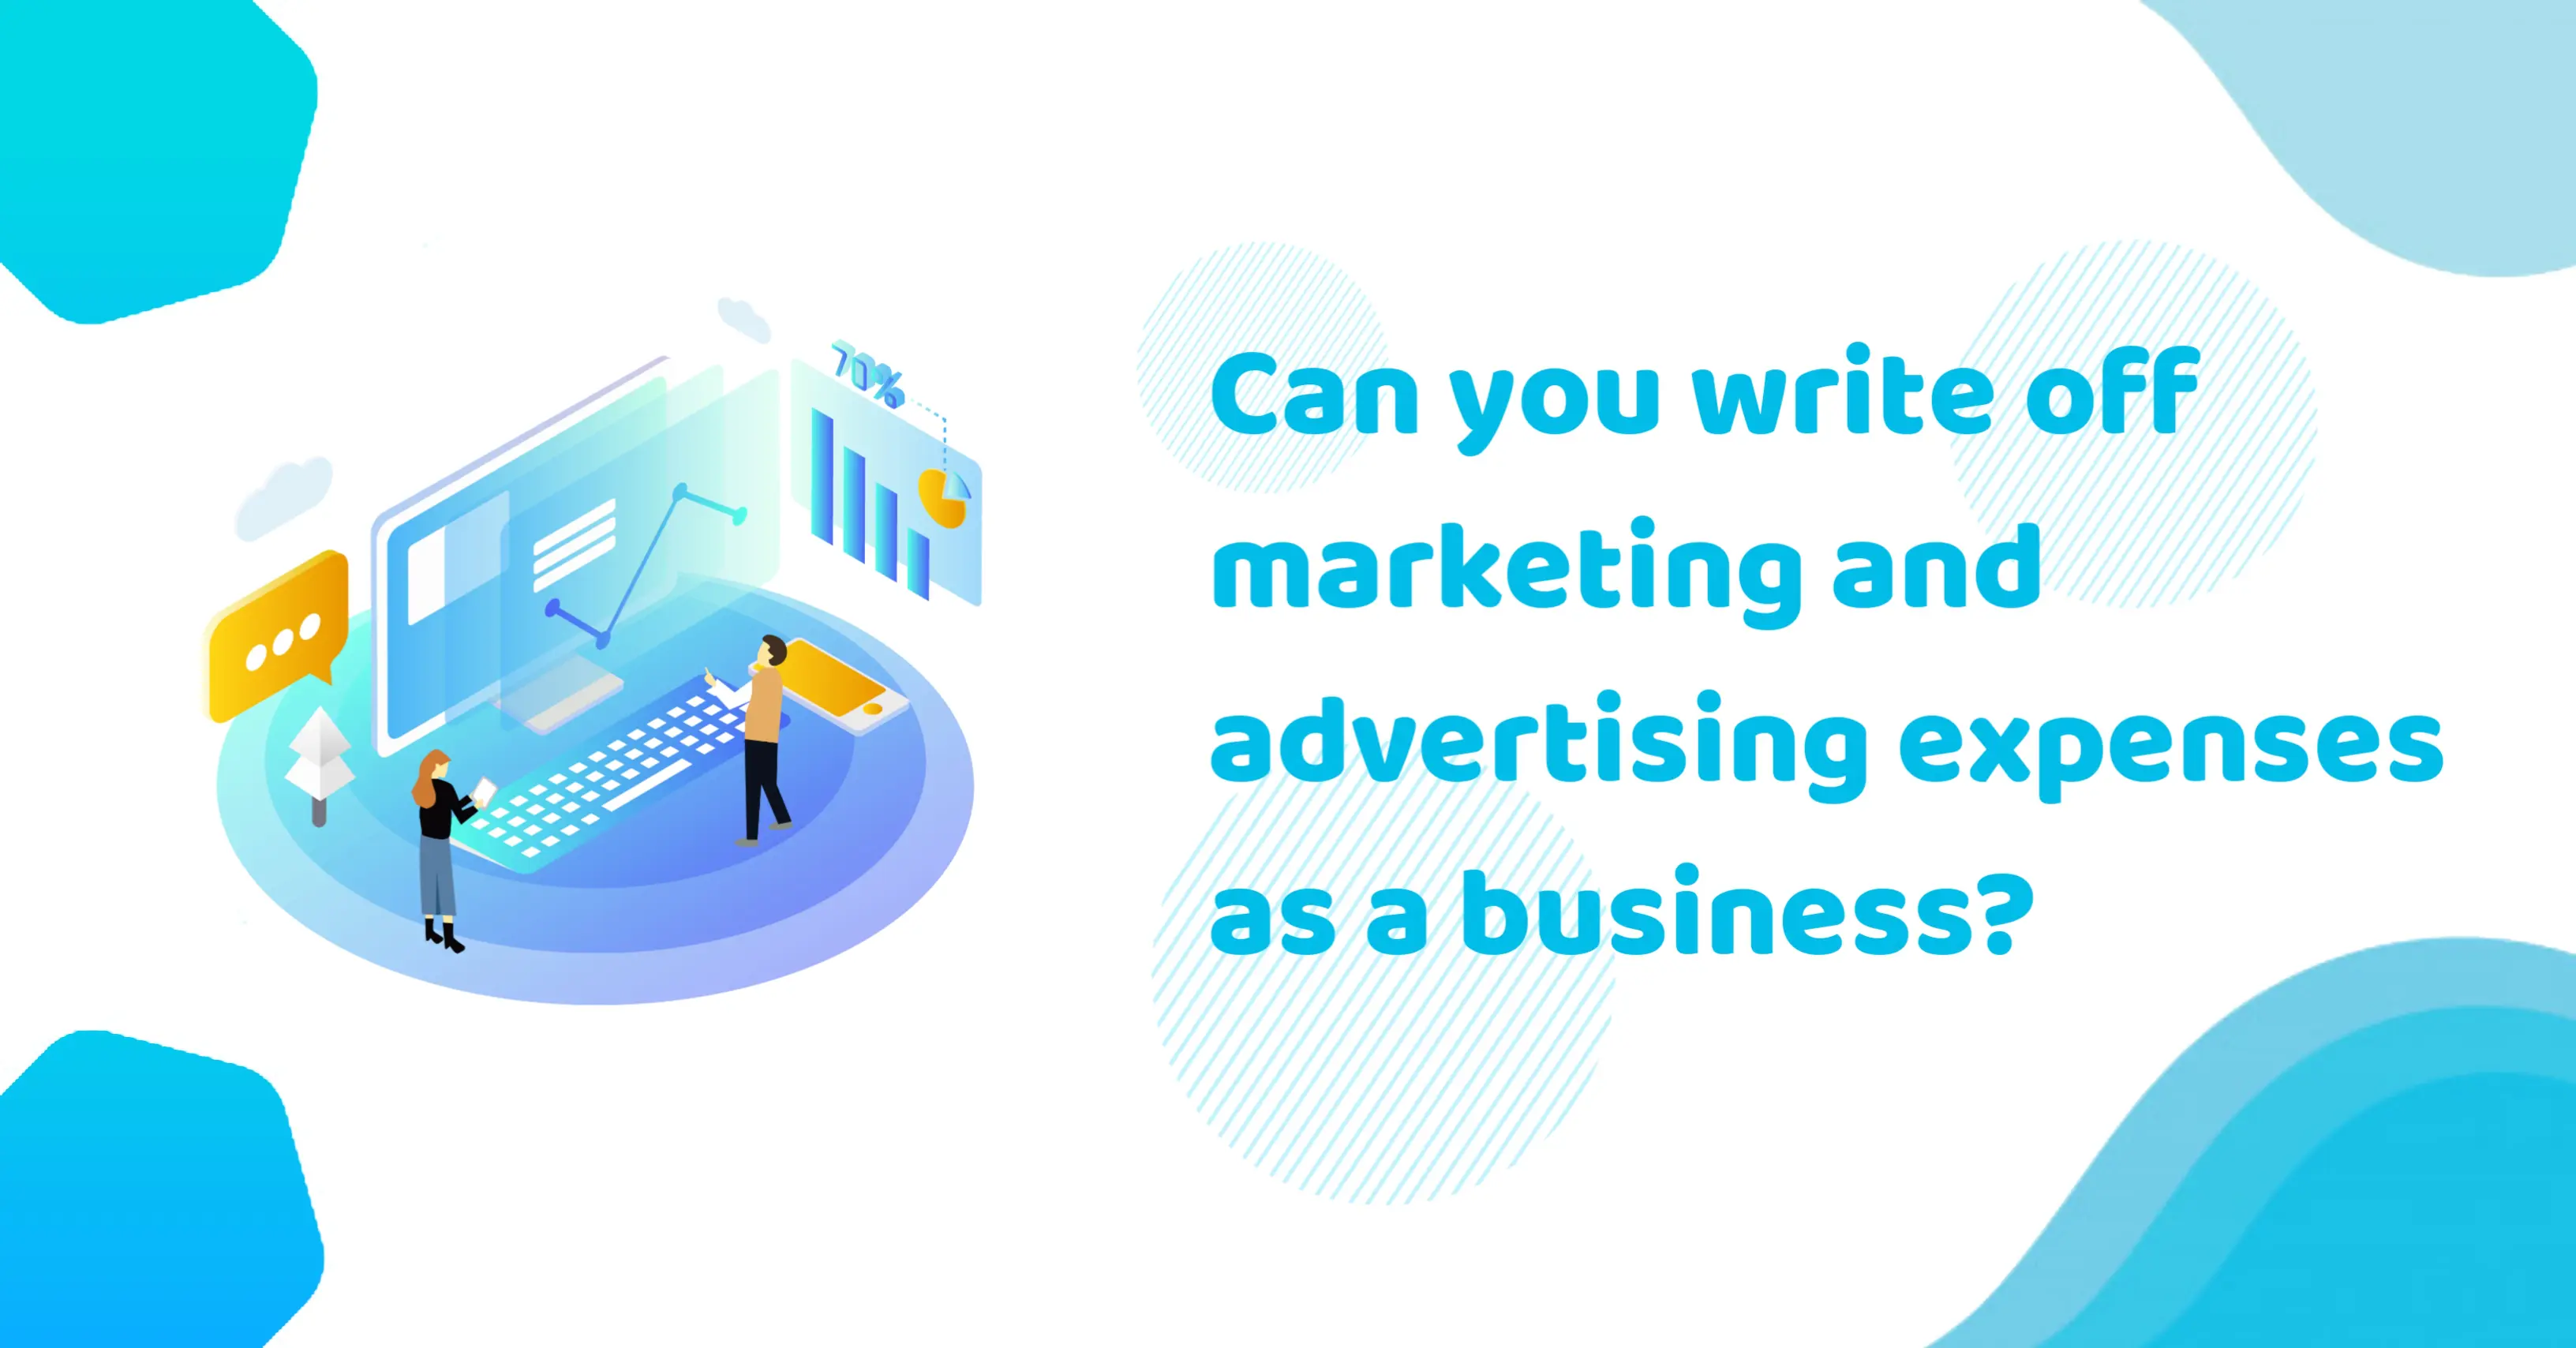 Can You Write Off Marketing And Advertising Expenses As A Business?